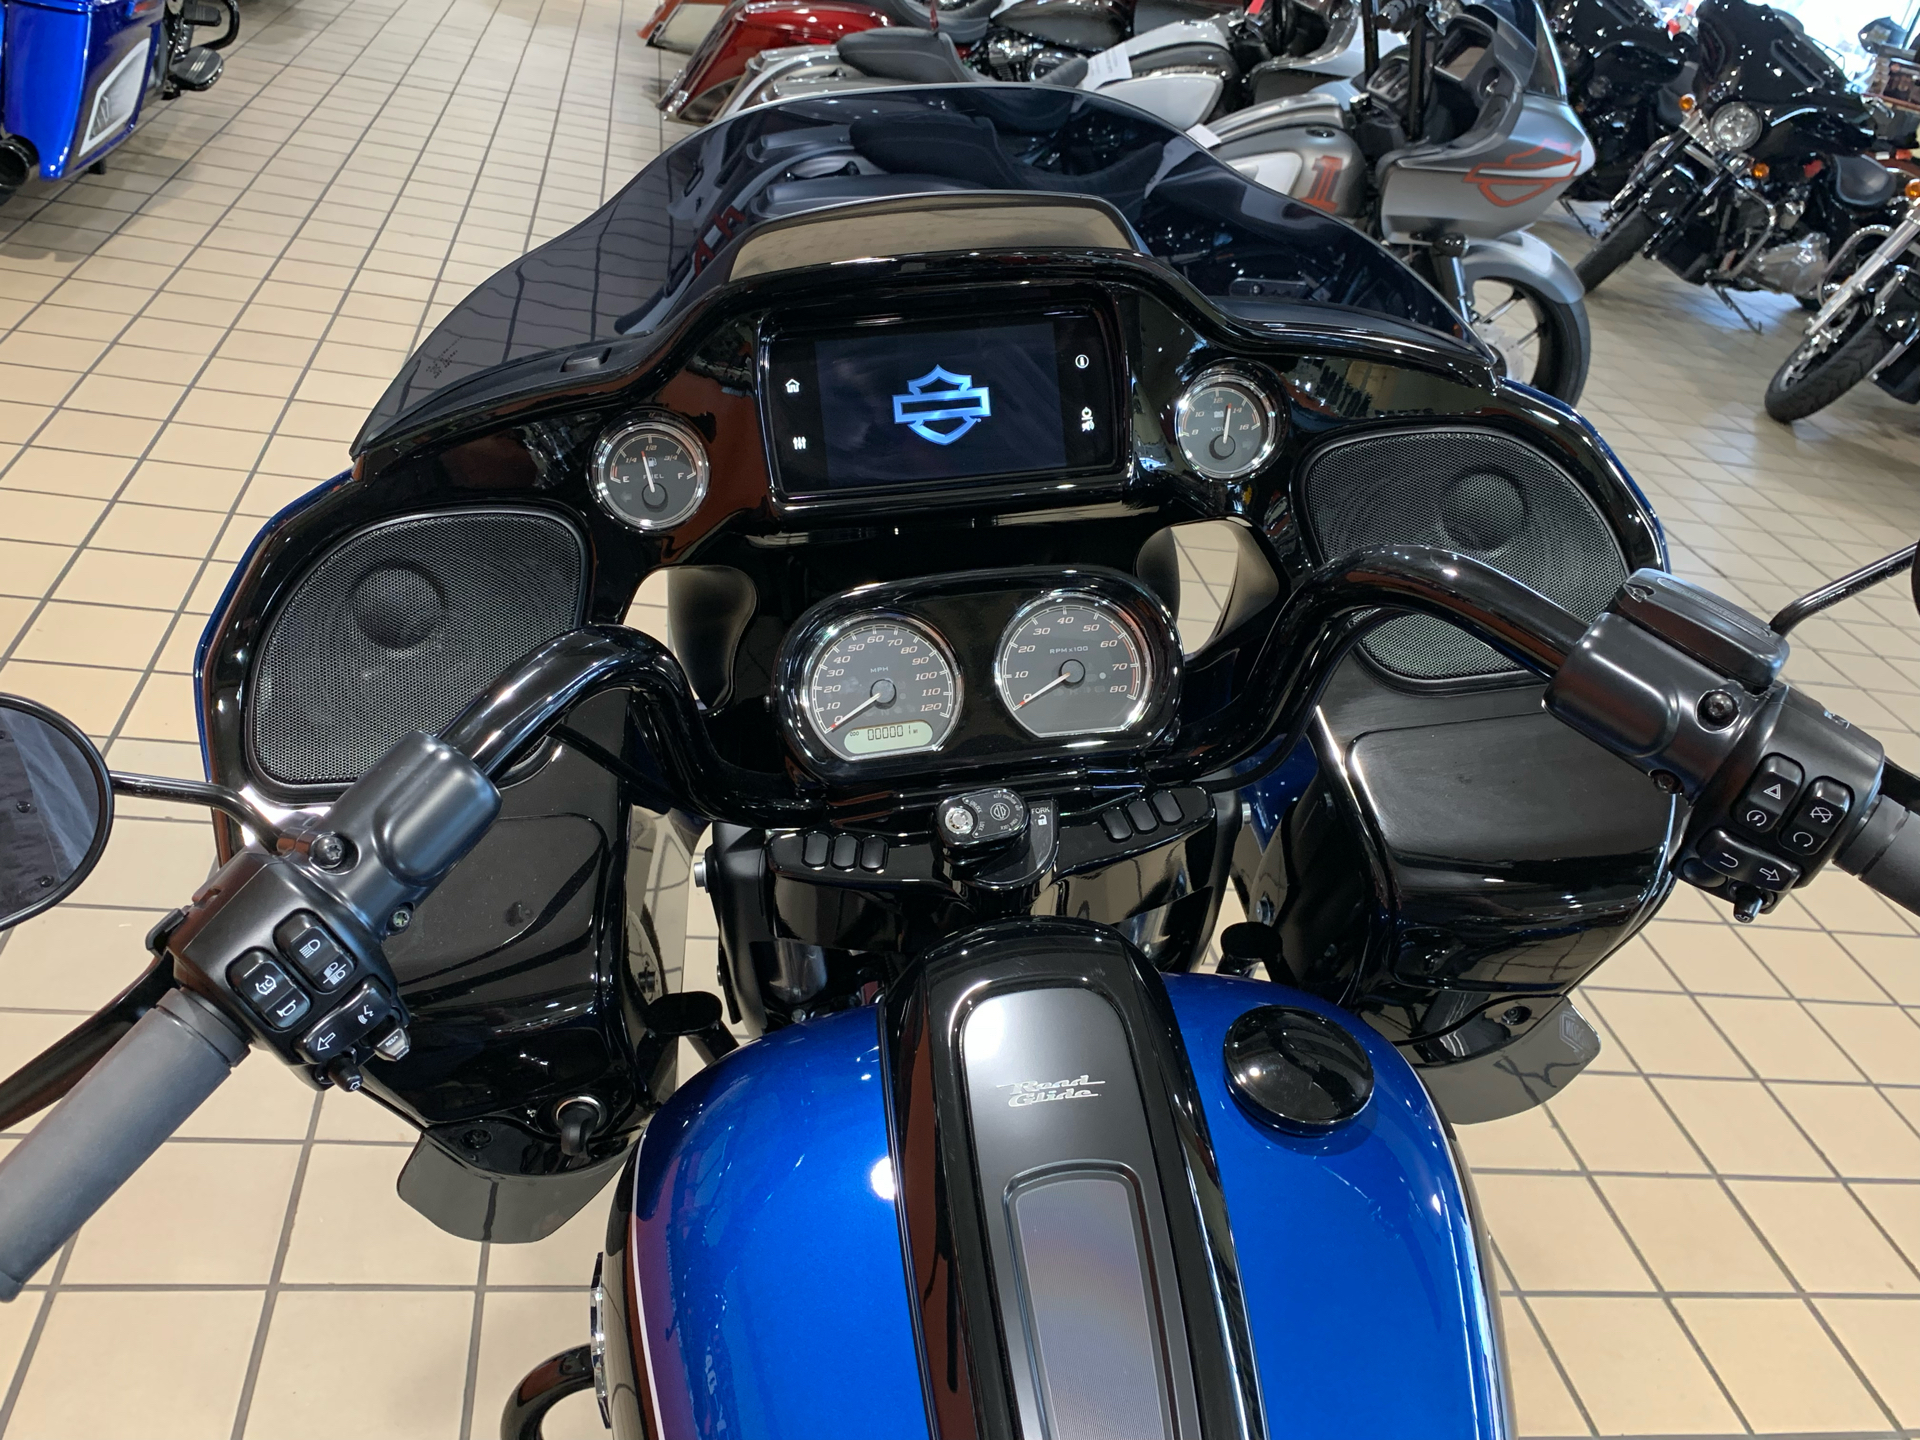 2022 Harley-Davidson ROAD GLIDE SPECIAL in Dumfries, Virginia - Photo 4